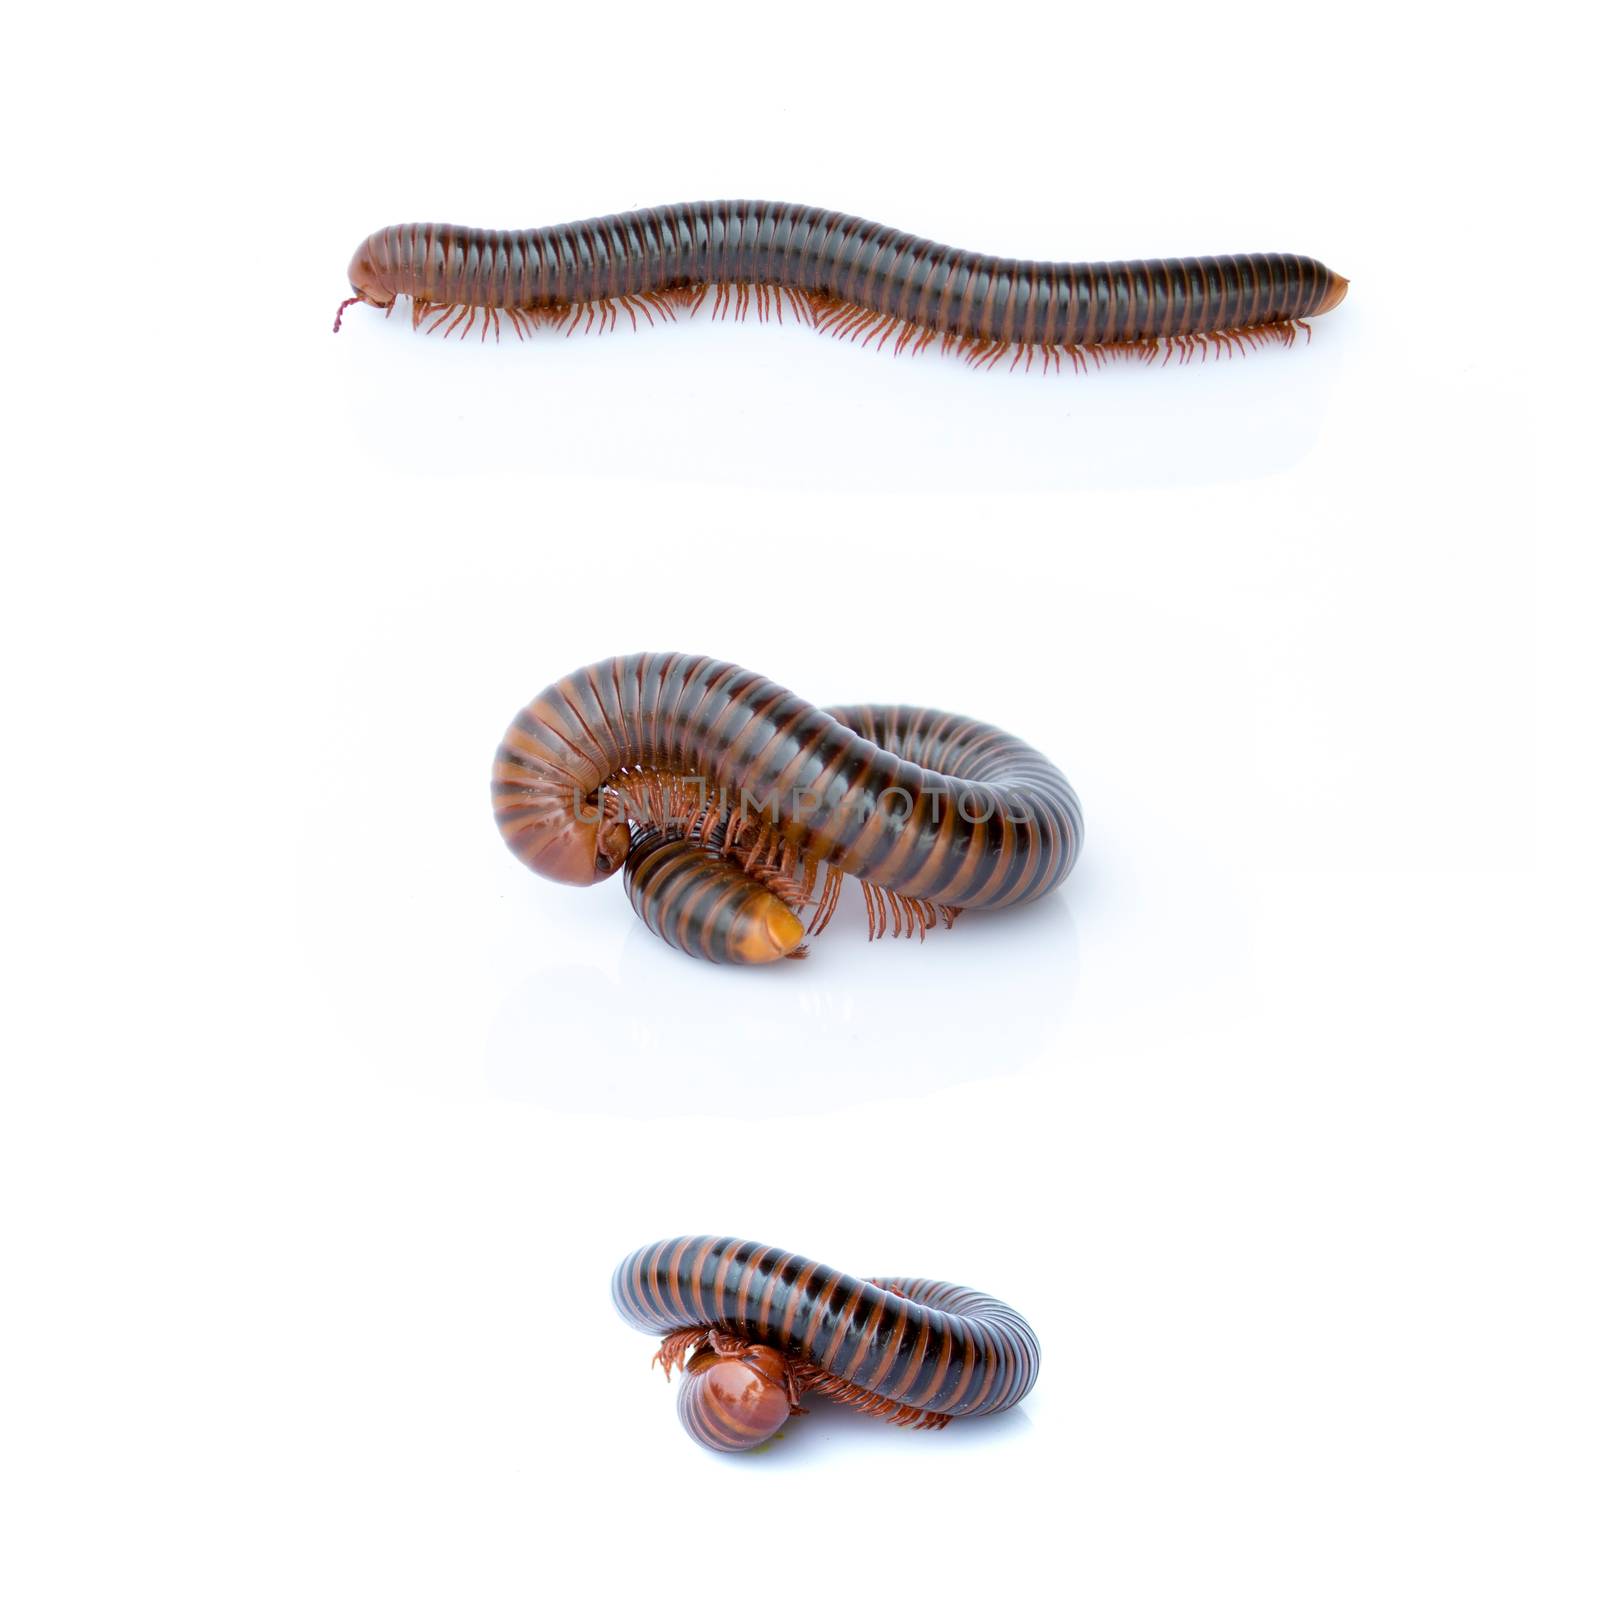 Image of a millipede on white background. Reptile Animal. by yod67